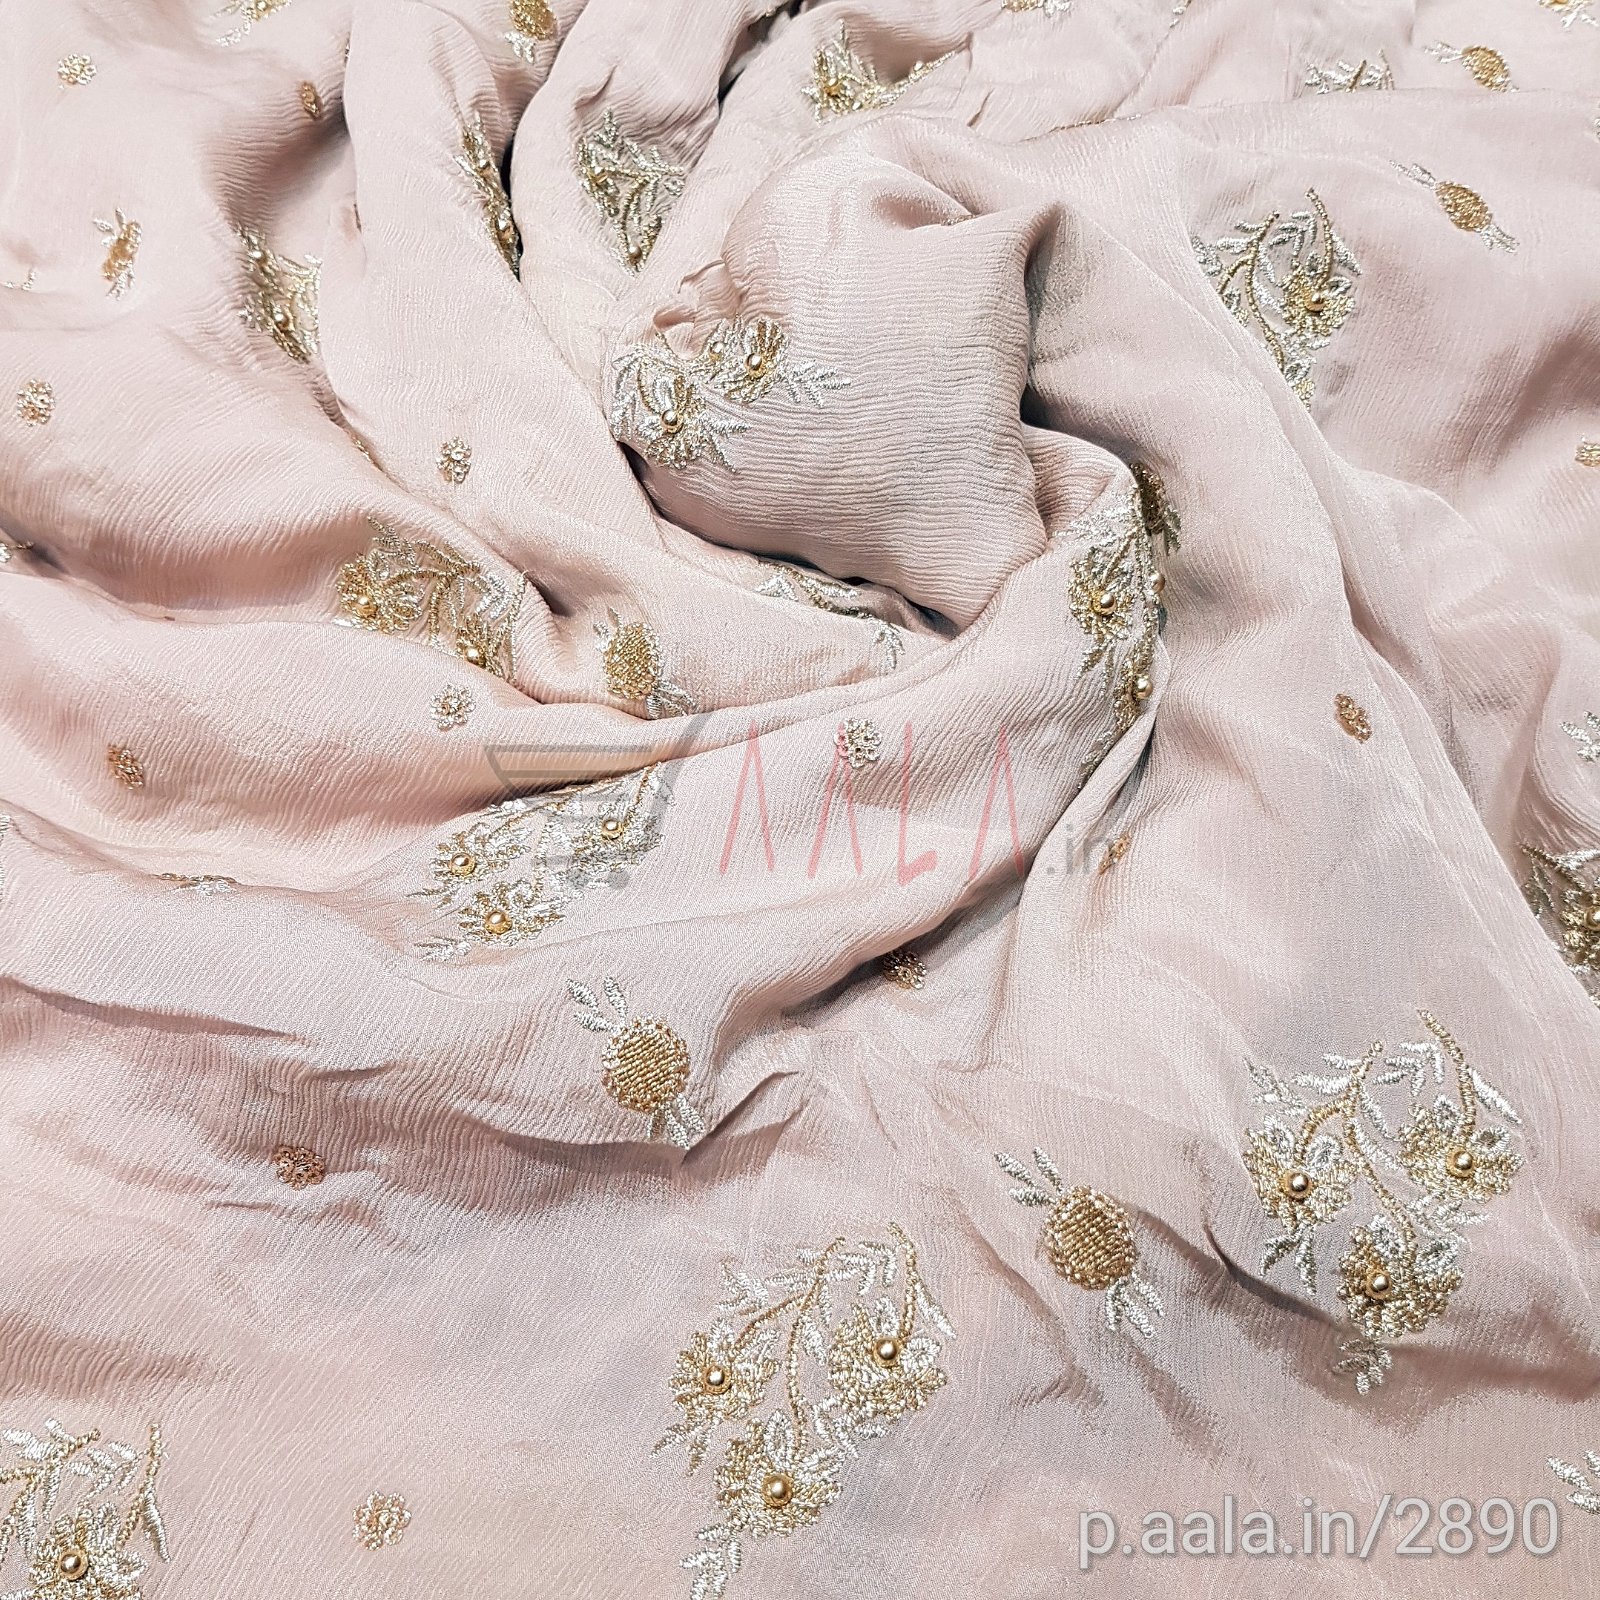 Hand Embroidered Crepe Chiffon Viscose 44 Inches Dyed Per Metre #2890